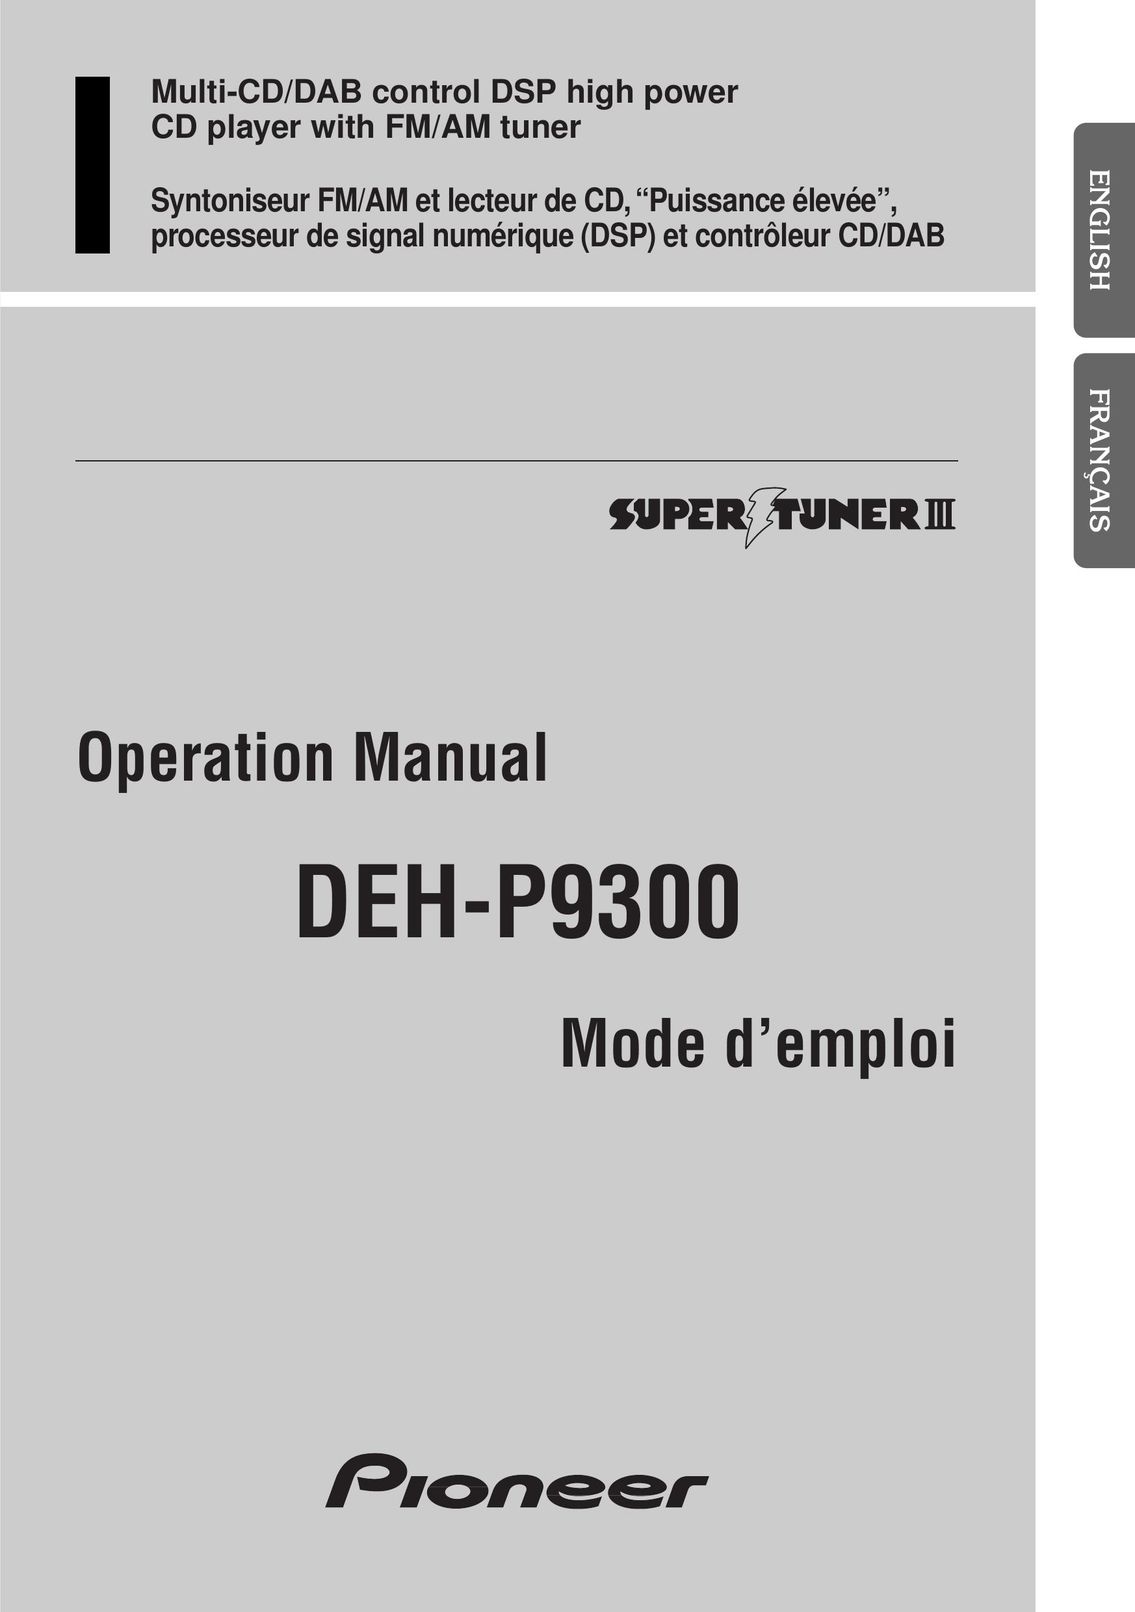 Pioneer DEH-P9300 Stereo System User Manual